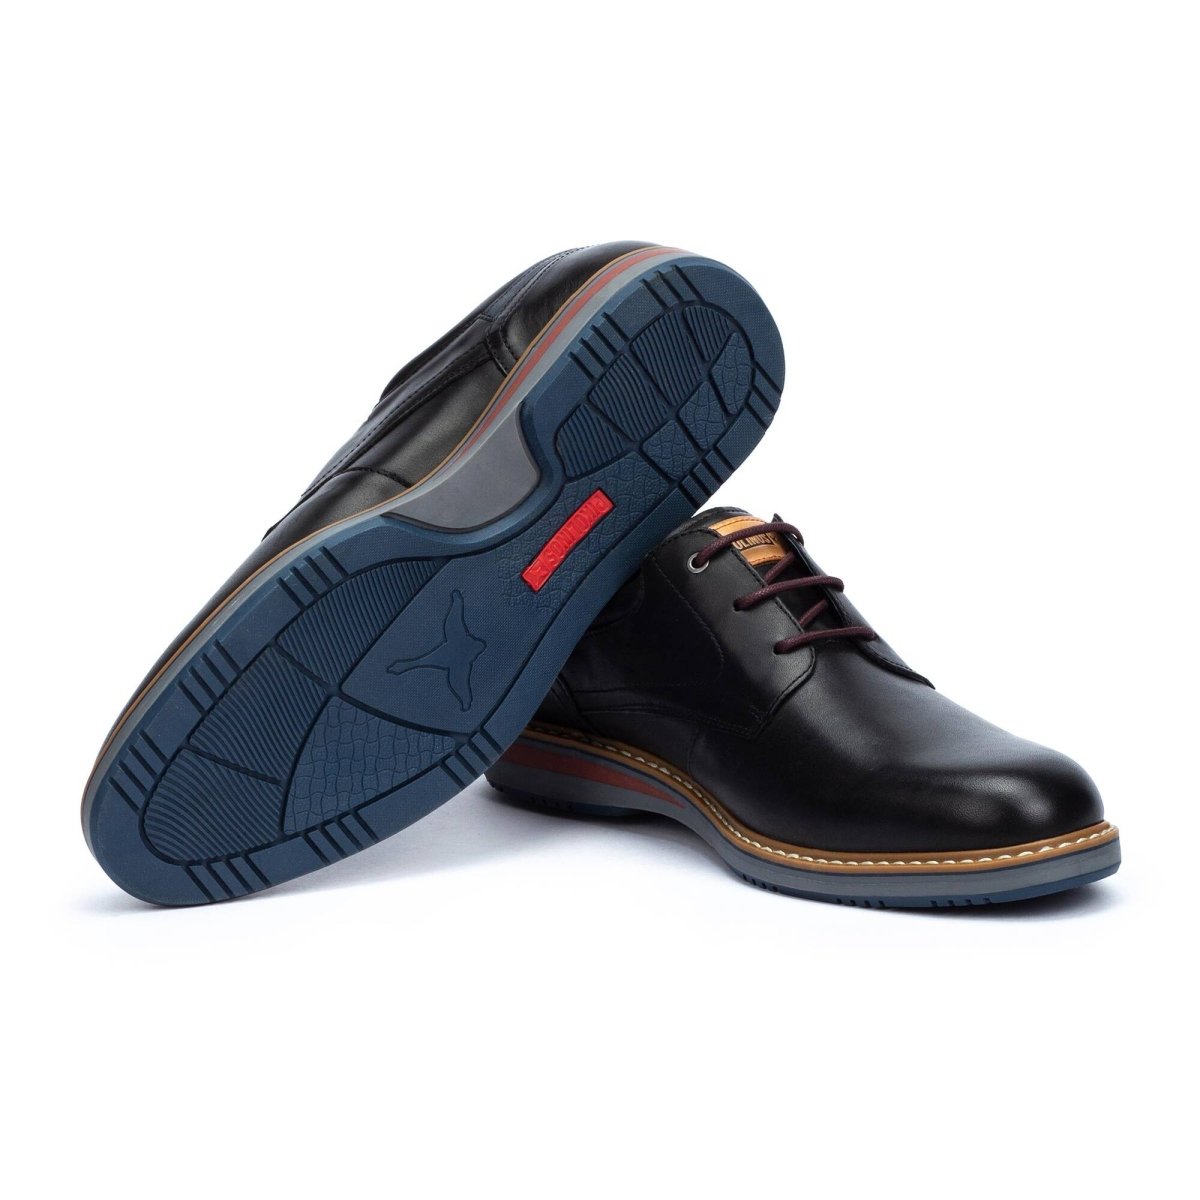 PIKOLINOS AVILA M1T-4050 MEN'S LACE-UP LEATHER SHOES IN BLACK - TLW Shoes